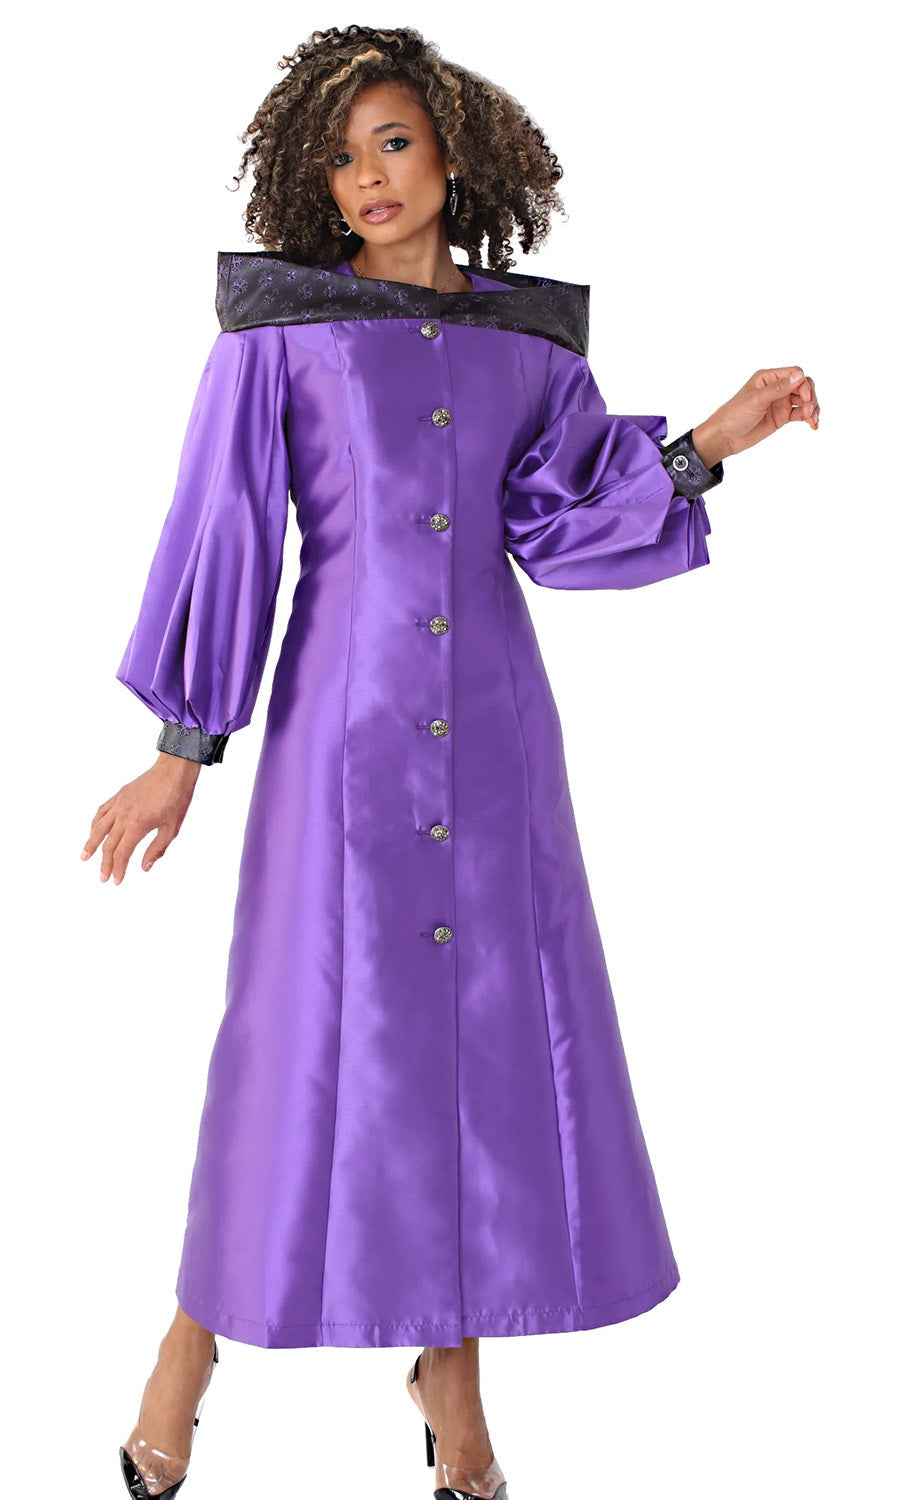 Tally Taylor Church Robe 4803C-Purple - Church Suits For Less